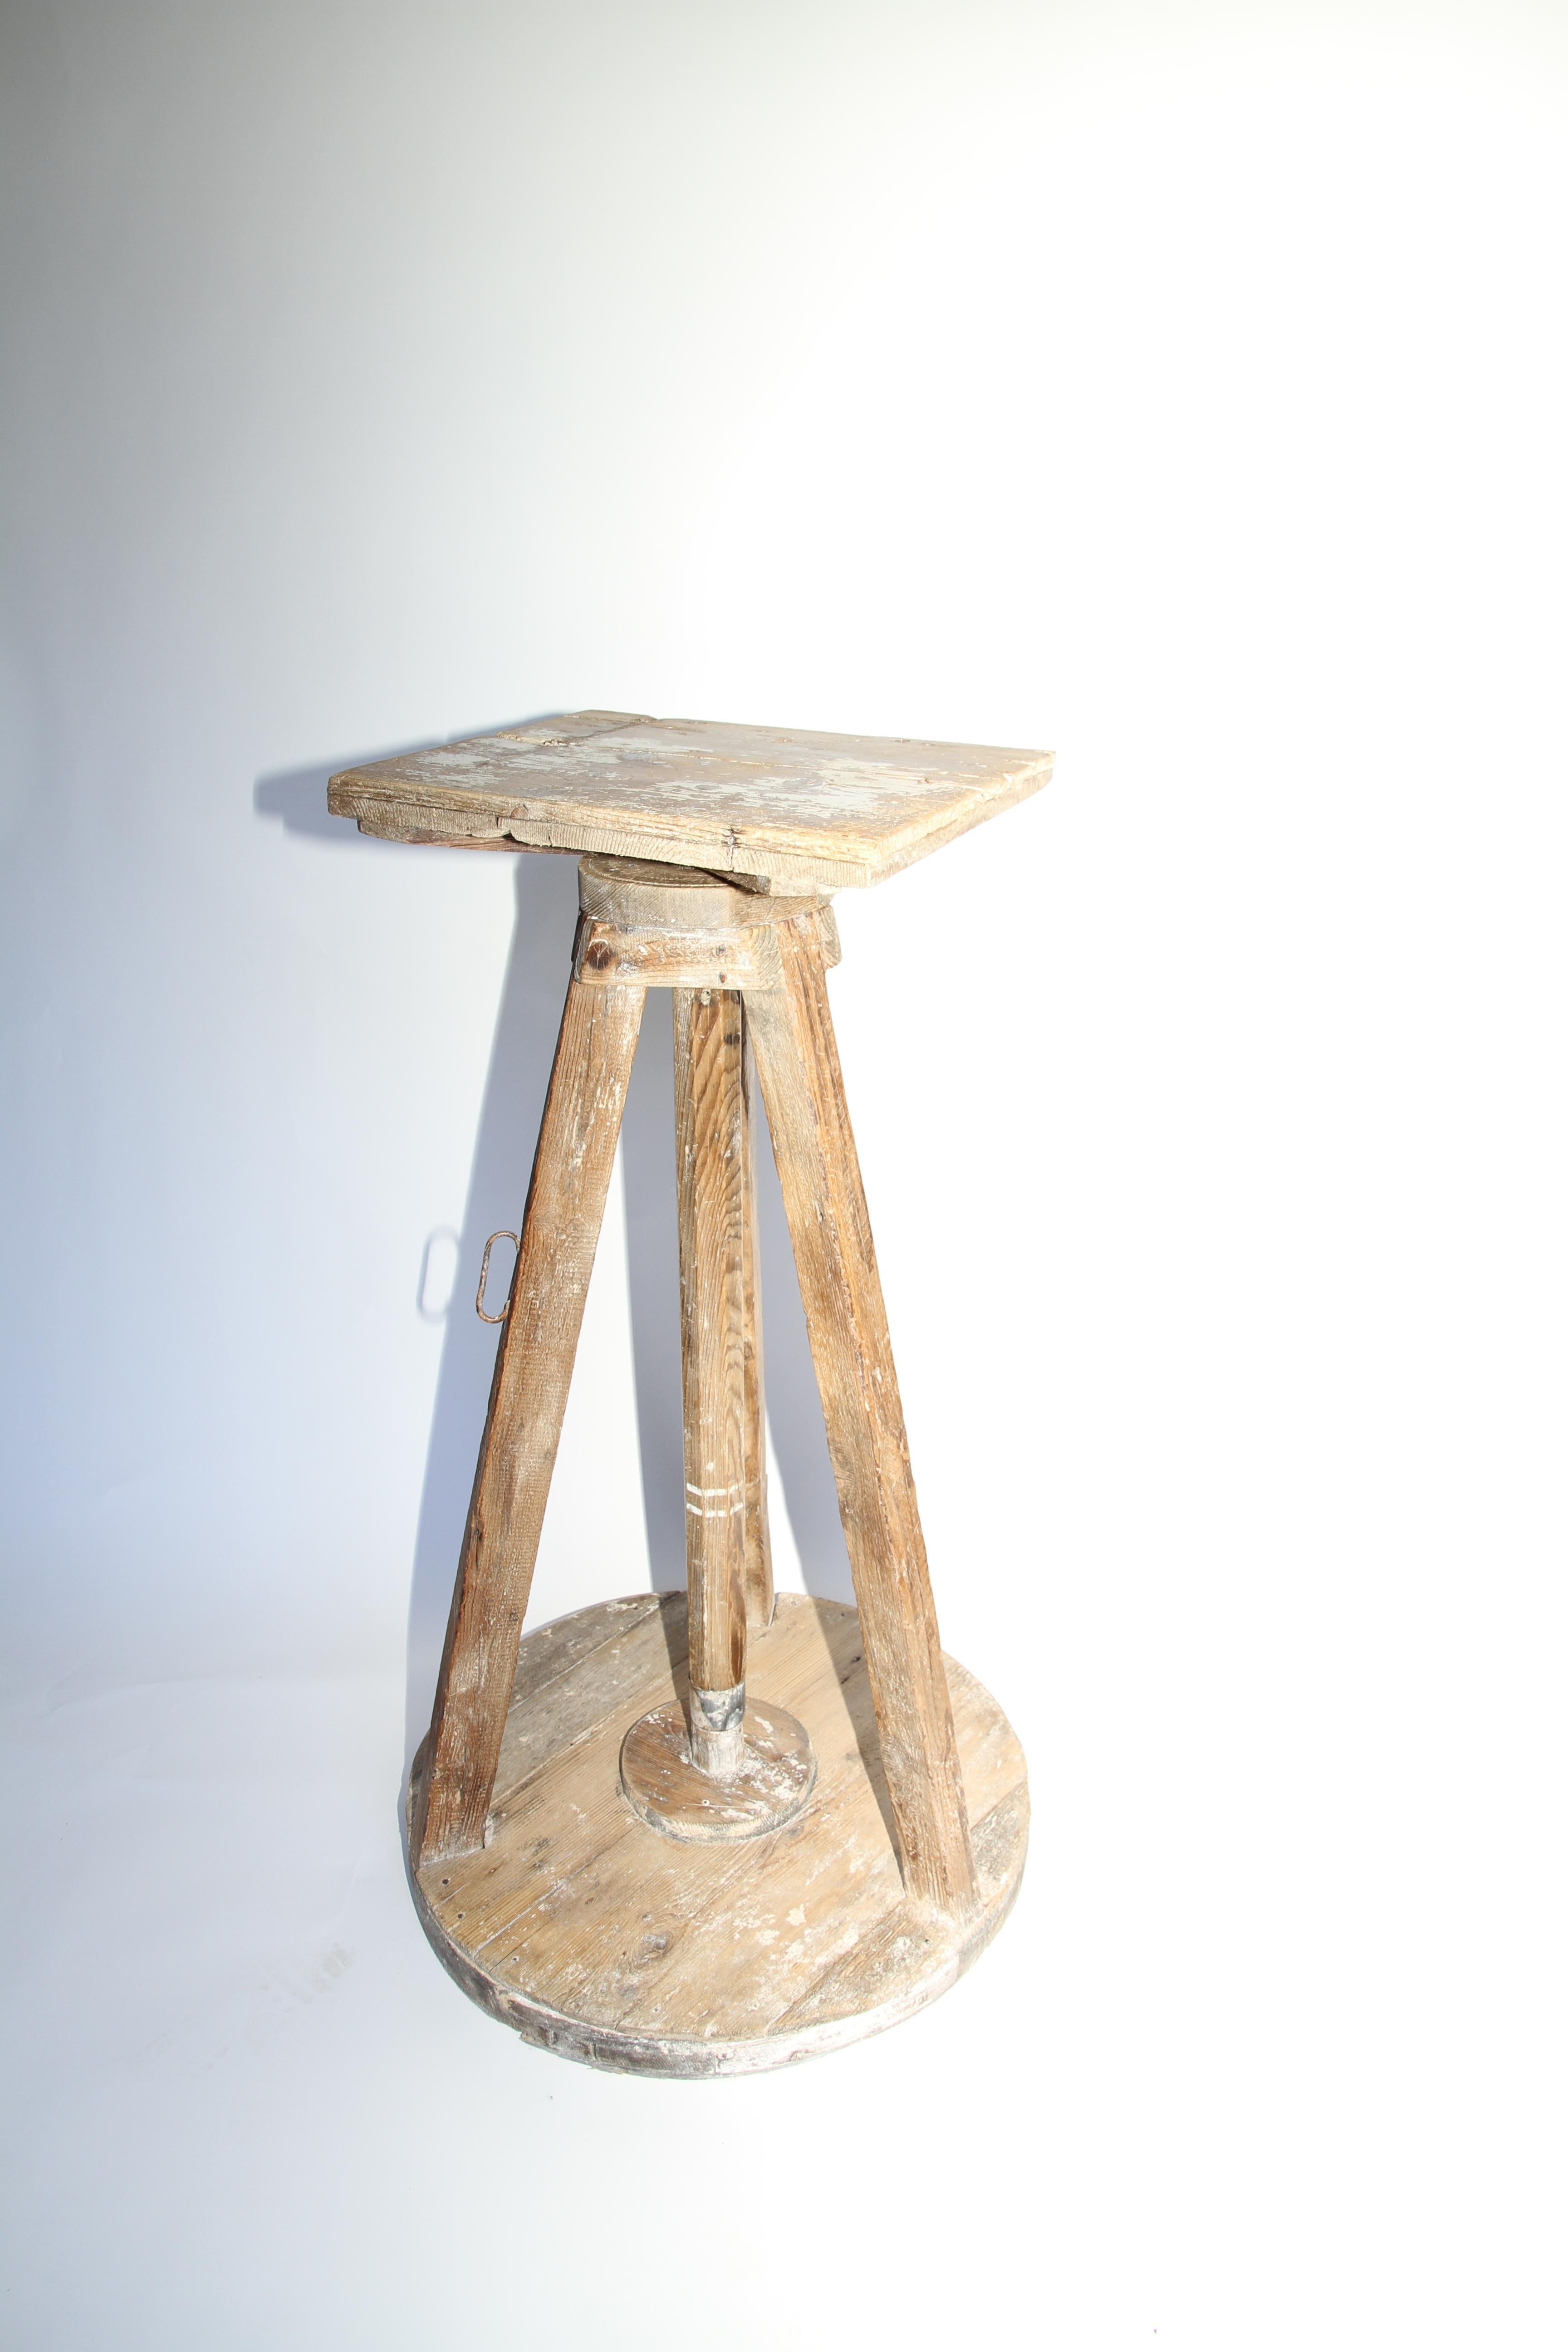 An old sculptor's table finds a new life as a captivating Stand, display your art or as a piece of art itself. Found in France, a wooden base supports a revolving work surface with the entirety cleaned and waxed to a reveal a beautiful patina. On a